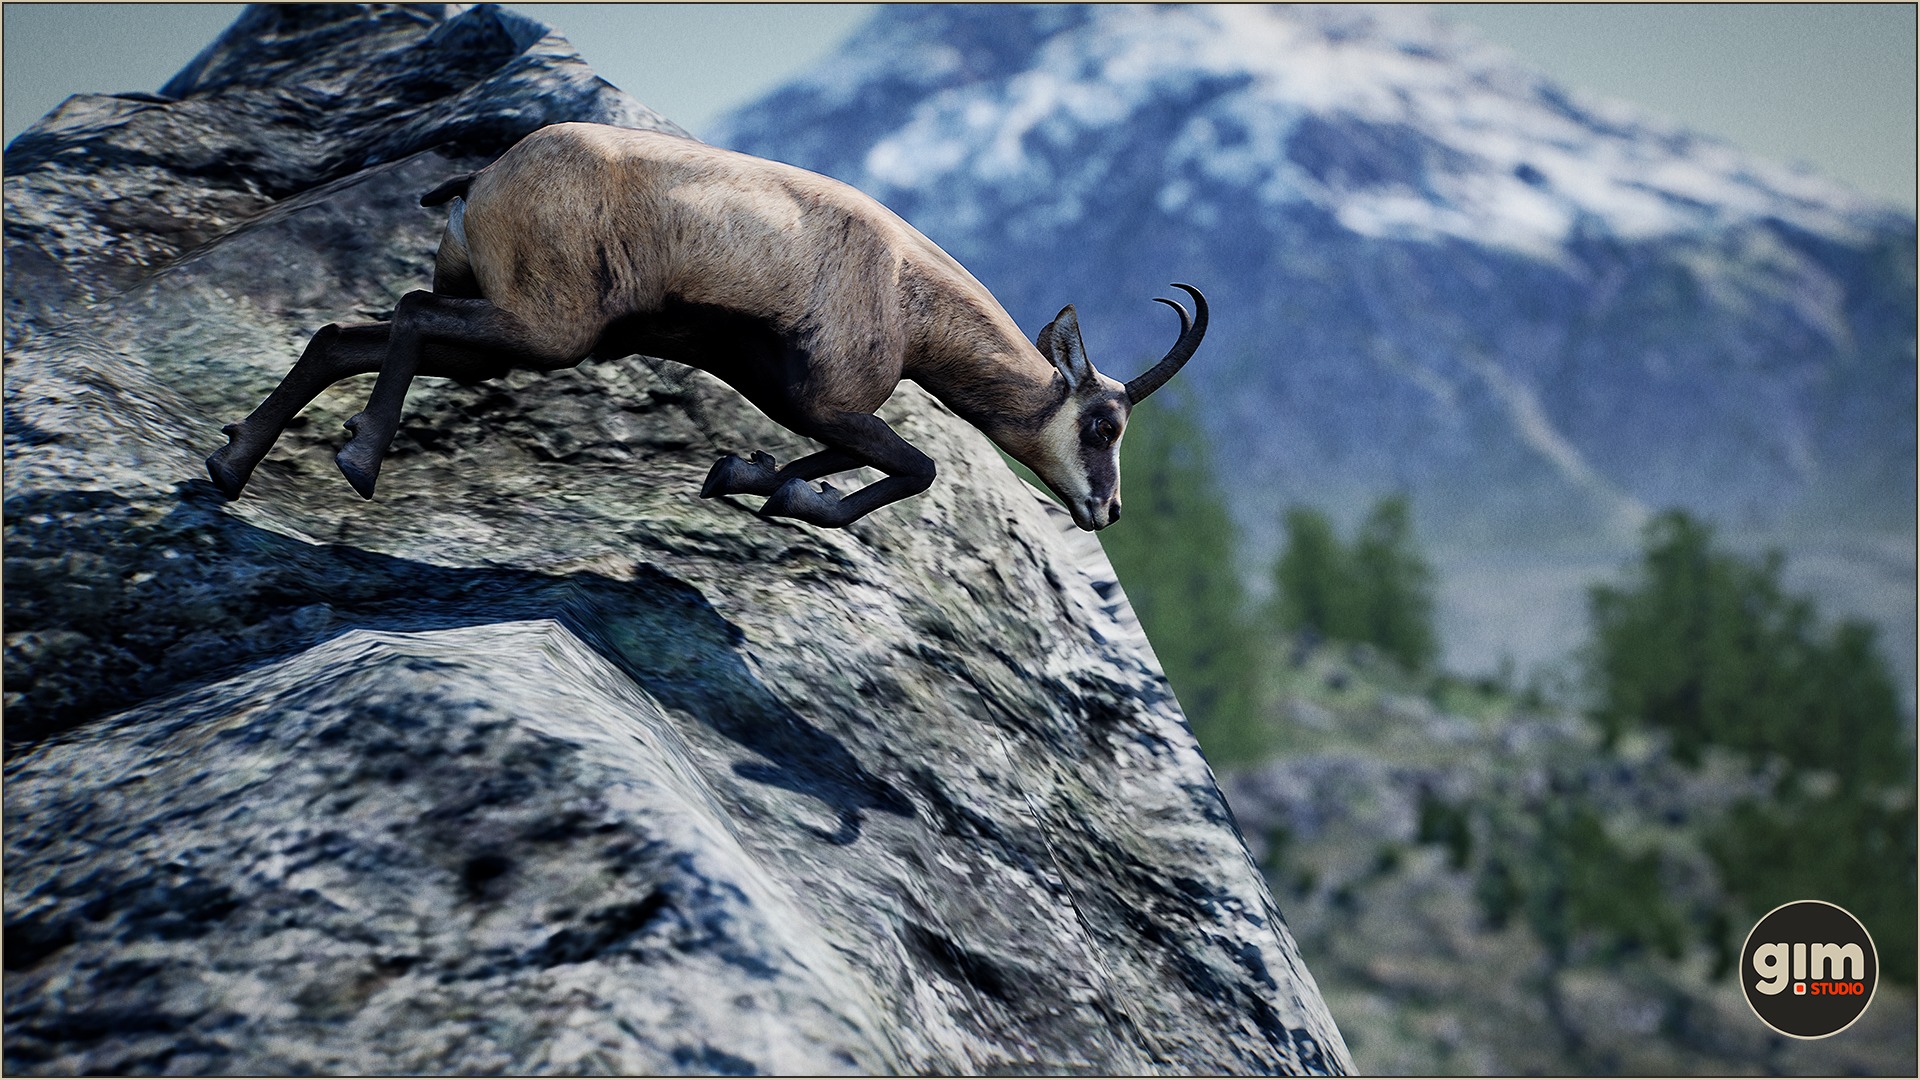 Male Chamois jumping down from what seems to be a dangerous height